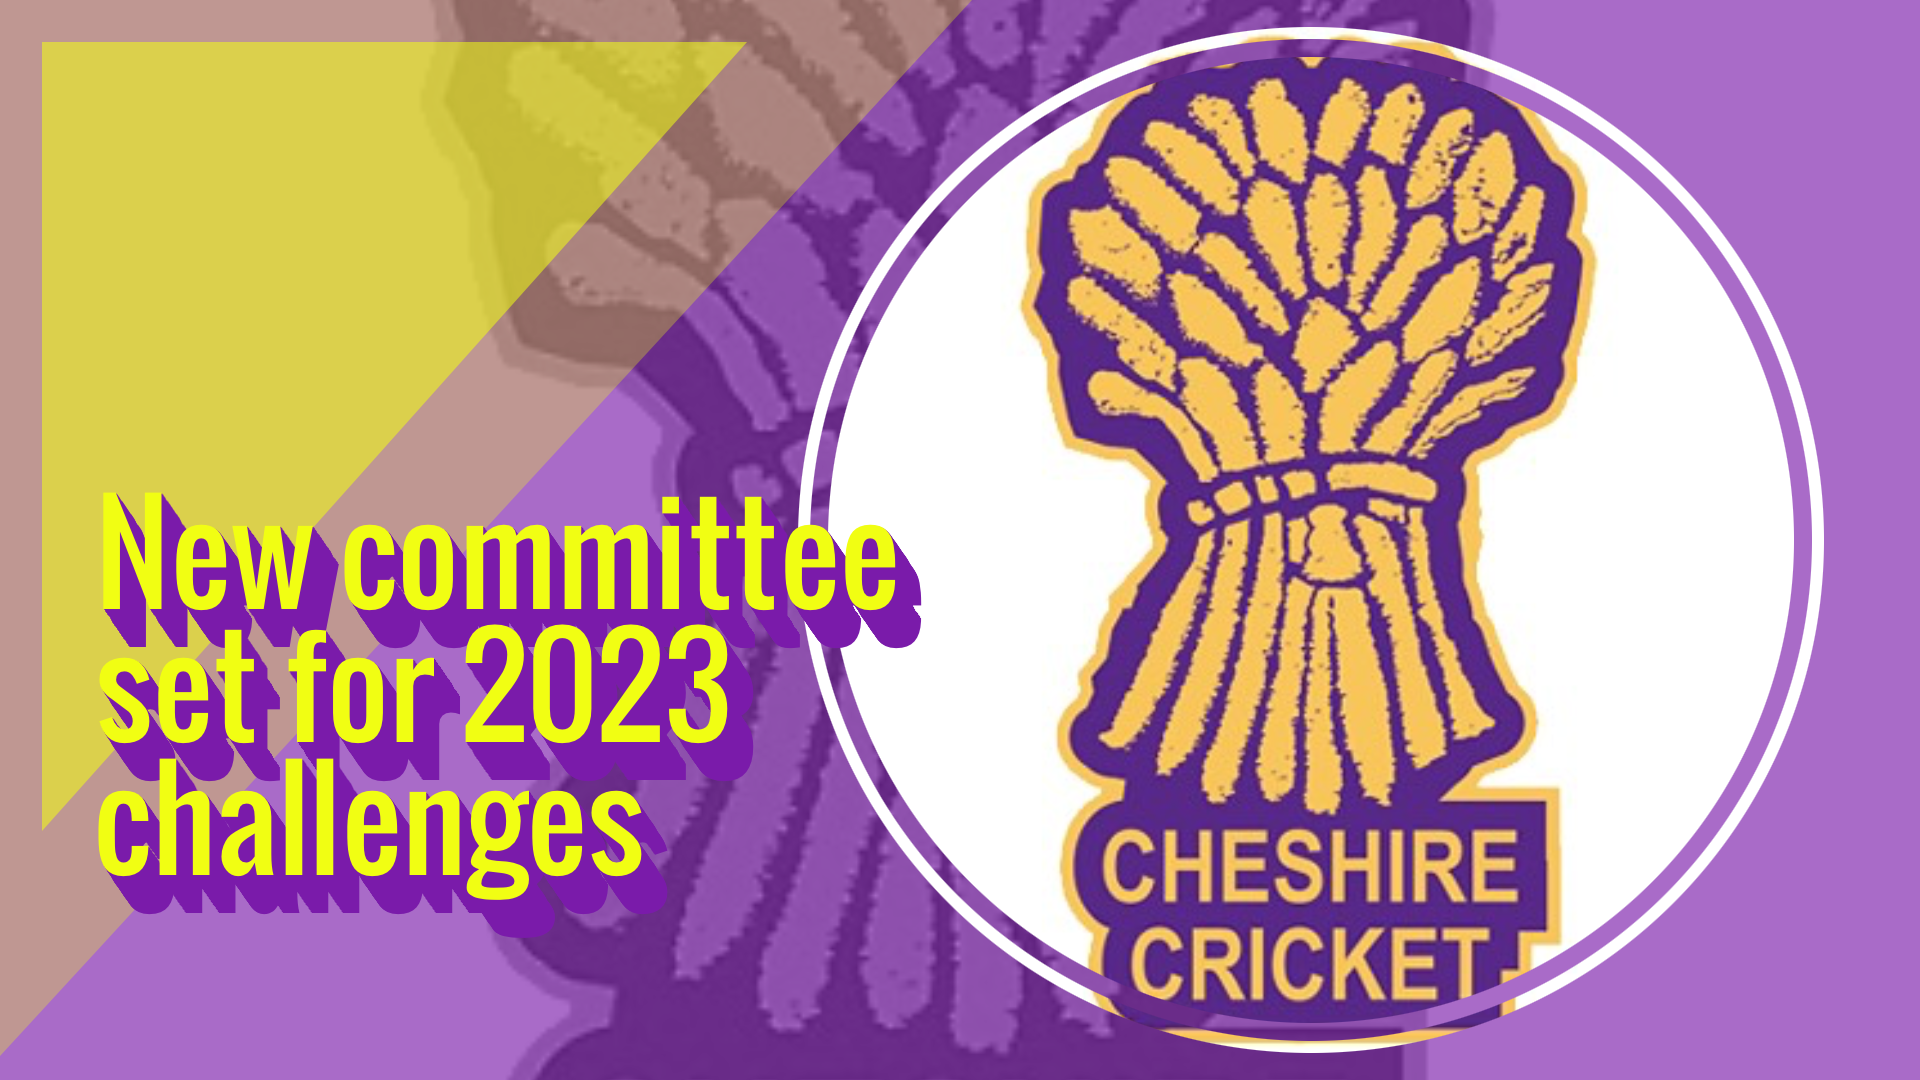 New committee set for 2023 challenges